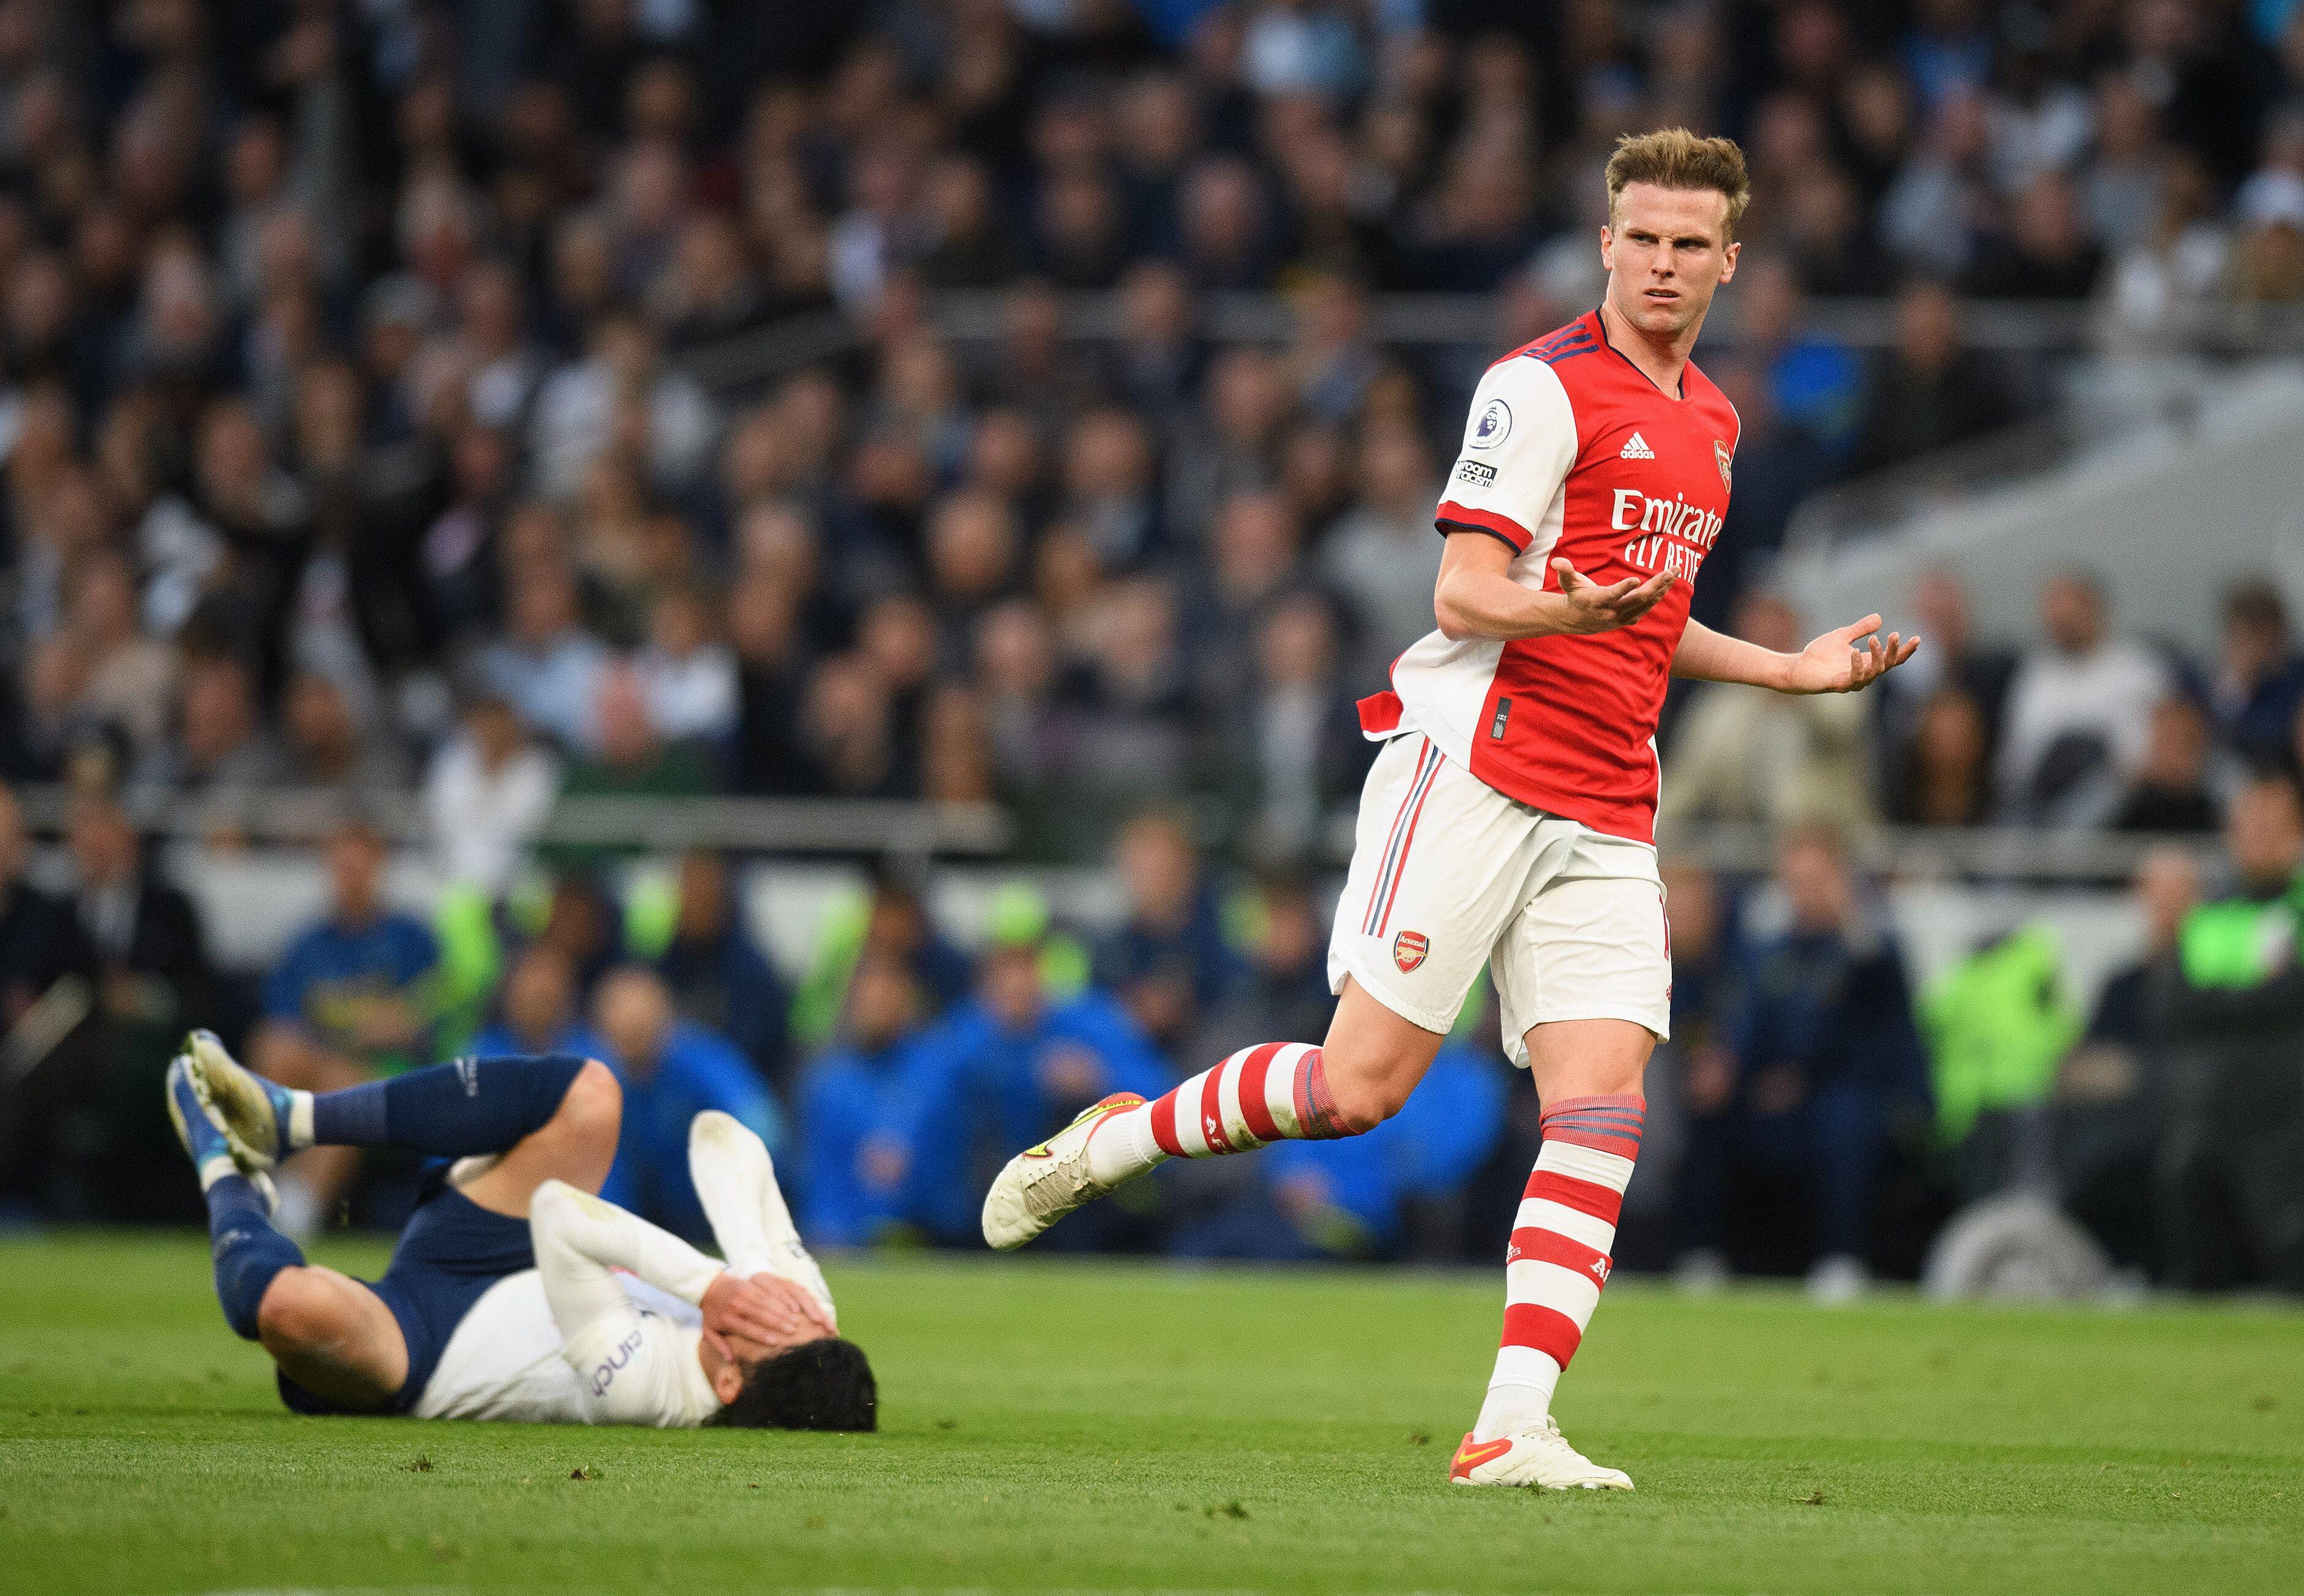 Newcastle United vs Arsenal LIVE: Gunners aim for FOURTH spot in the Premier League against revitalized Newcastle, Follow Newcastle vs Arsenal LIVE: Check Team News, Predicted Lineups